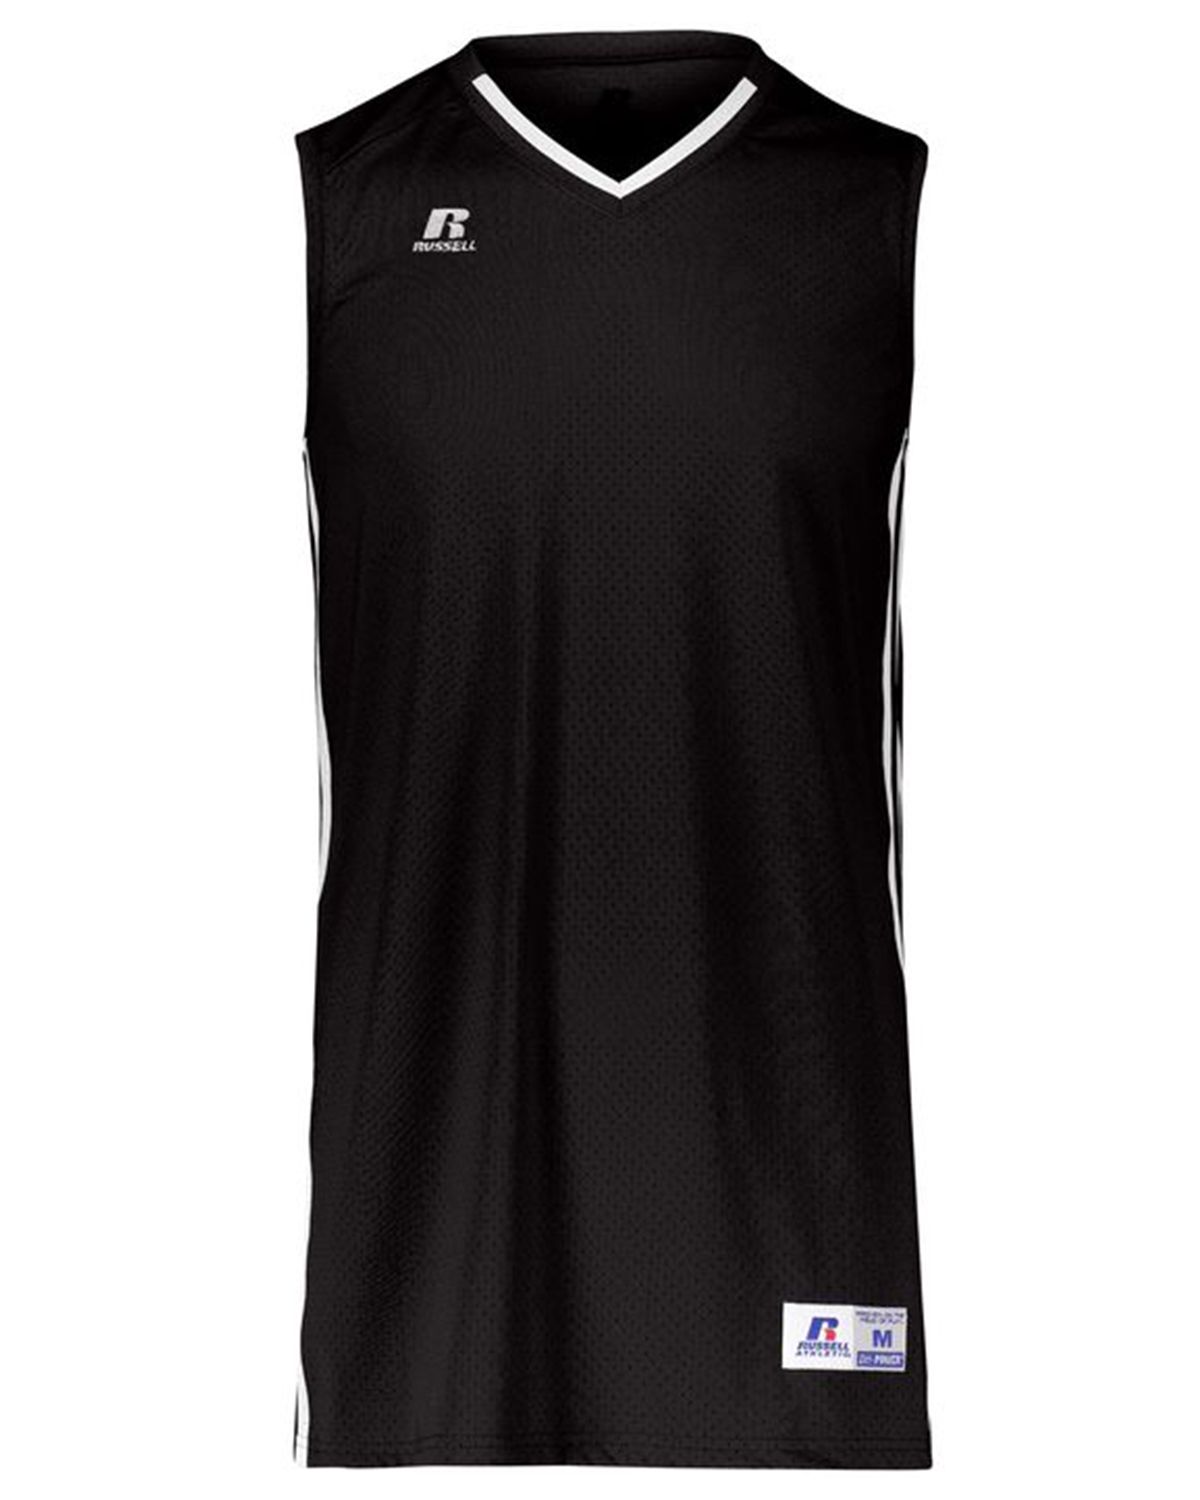  Russell Athletic Legacy Basketball Jersey - Men's